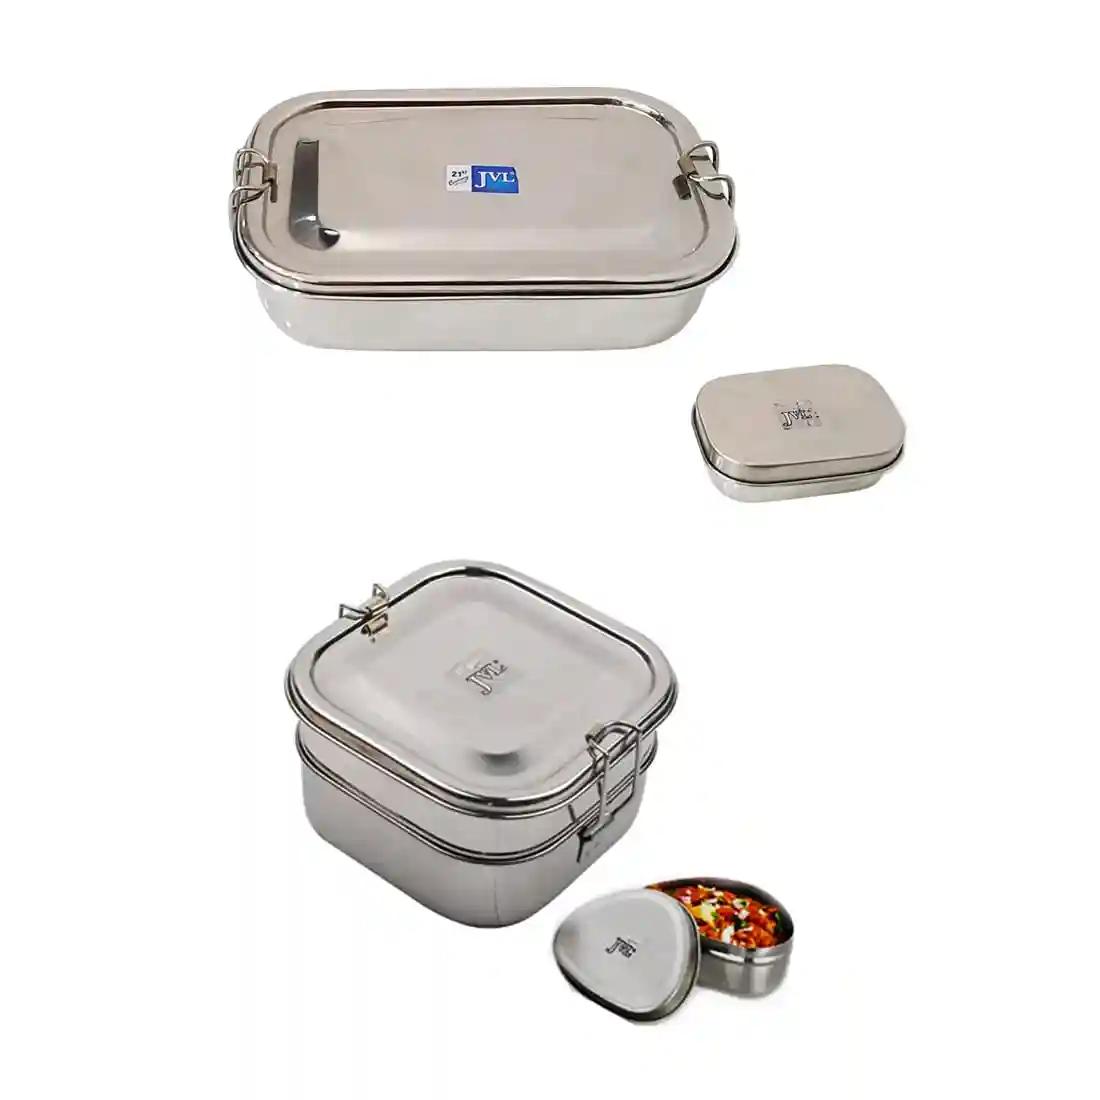 Jvl Stainless Steel Rectangular Single Layer Lunch Box With Small Container & Big Square Double Layer Lunch Box With Mini Container Not Leak Proof - Pack Of 2